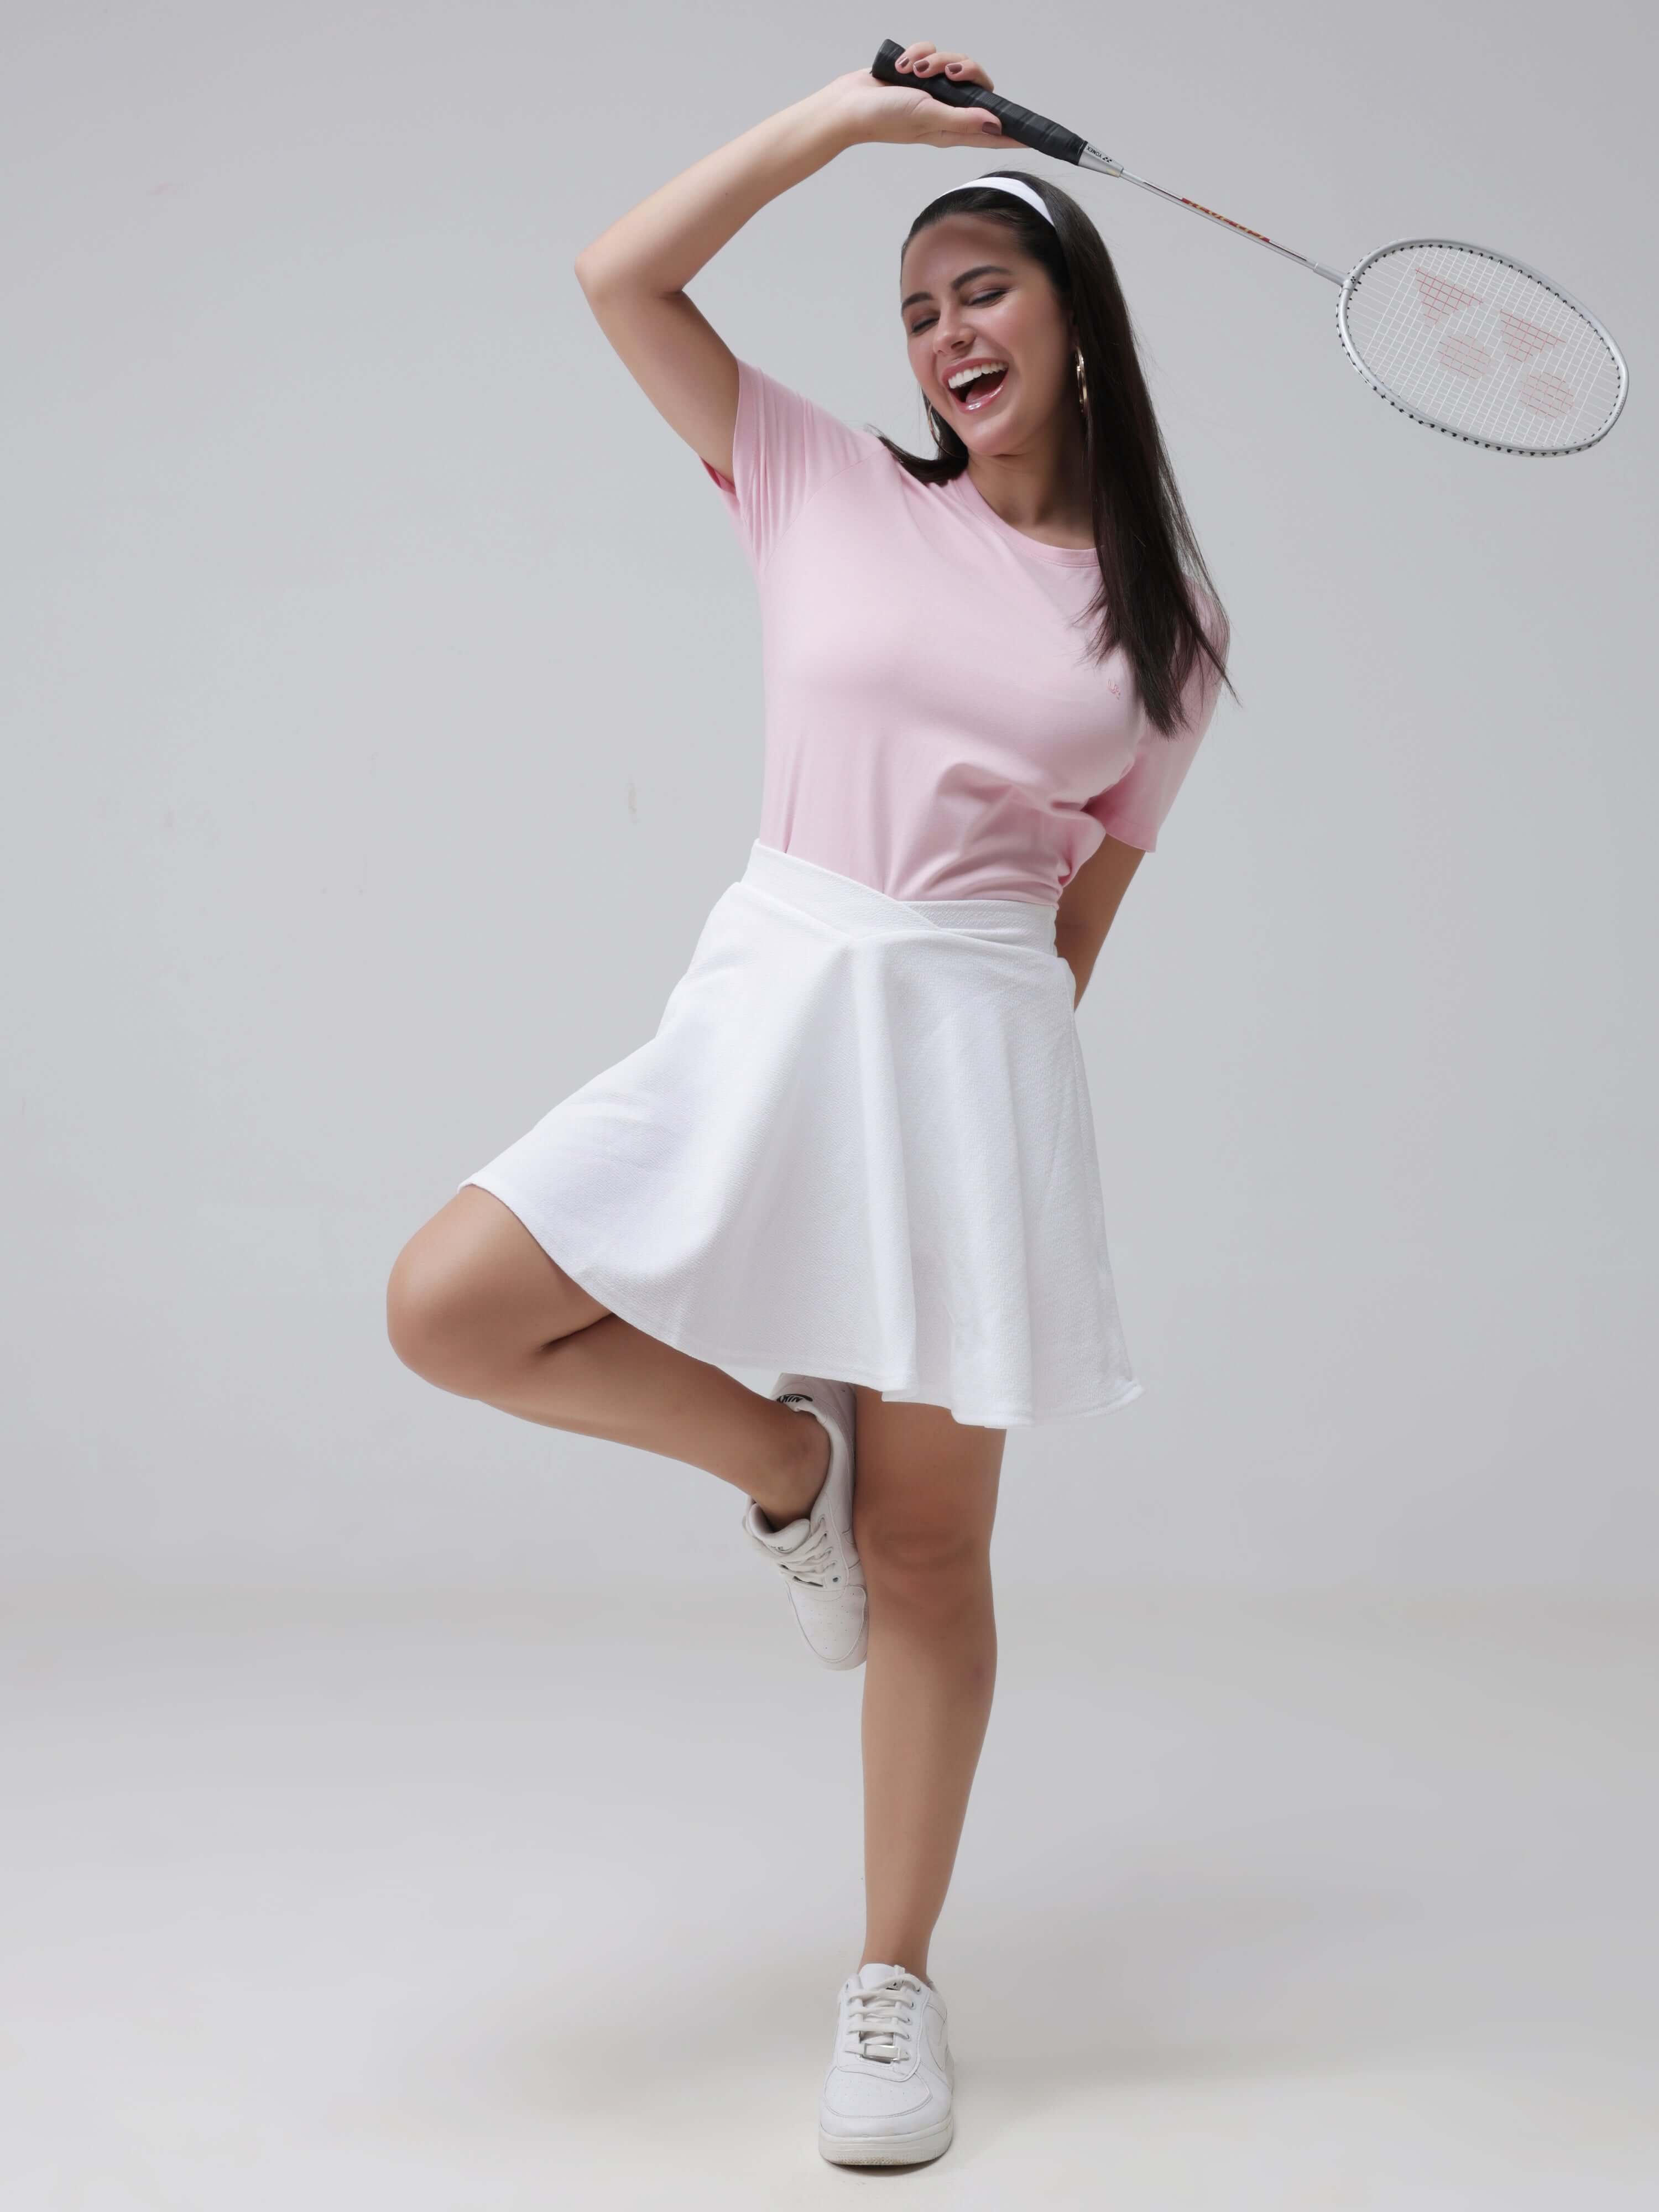 Woman wearing pink round-neck Turms T-shirt and white skirt, holding badminton racket, showcasing anti-stain, anti-odor, stretchable intelligent apparel.